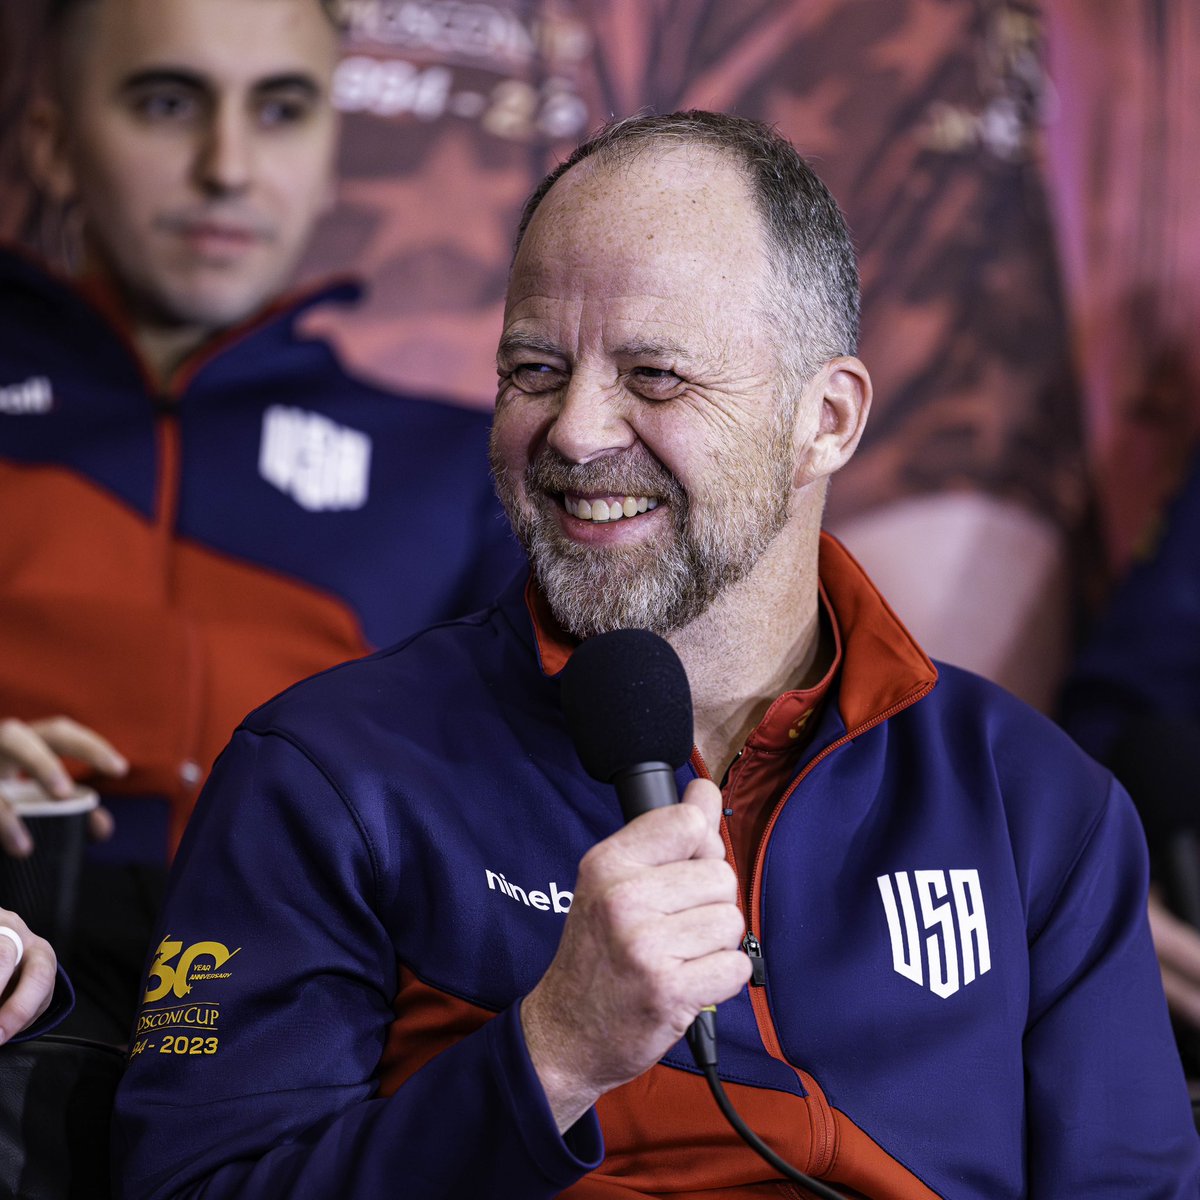 One of the voices of the WNT. Join us in wishing a very happy birthday to 2003 US Open Champion, former Mosconi Cup captain, and commentator extraordinaire Jeremy Jones who turns 53 today 🇺🇸